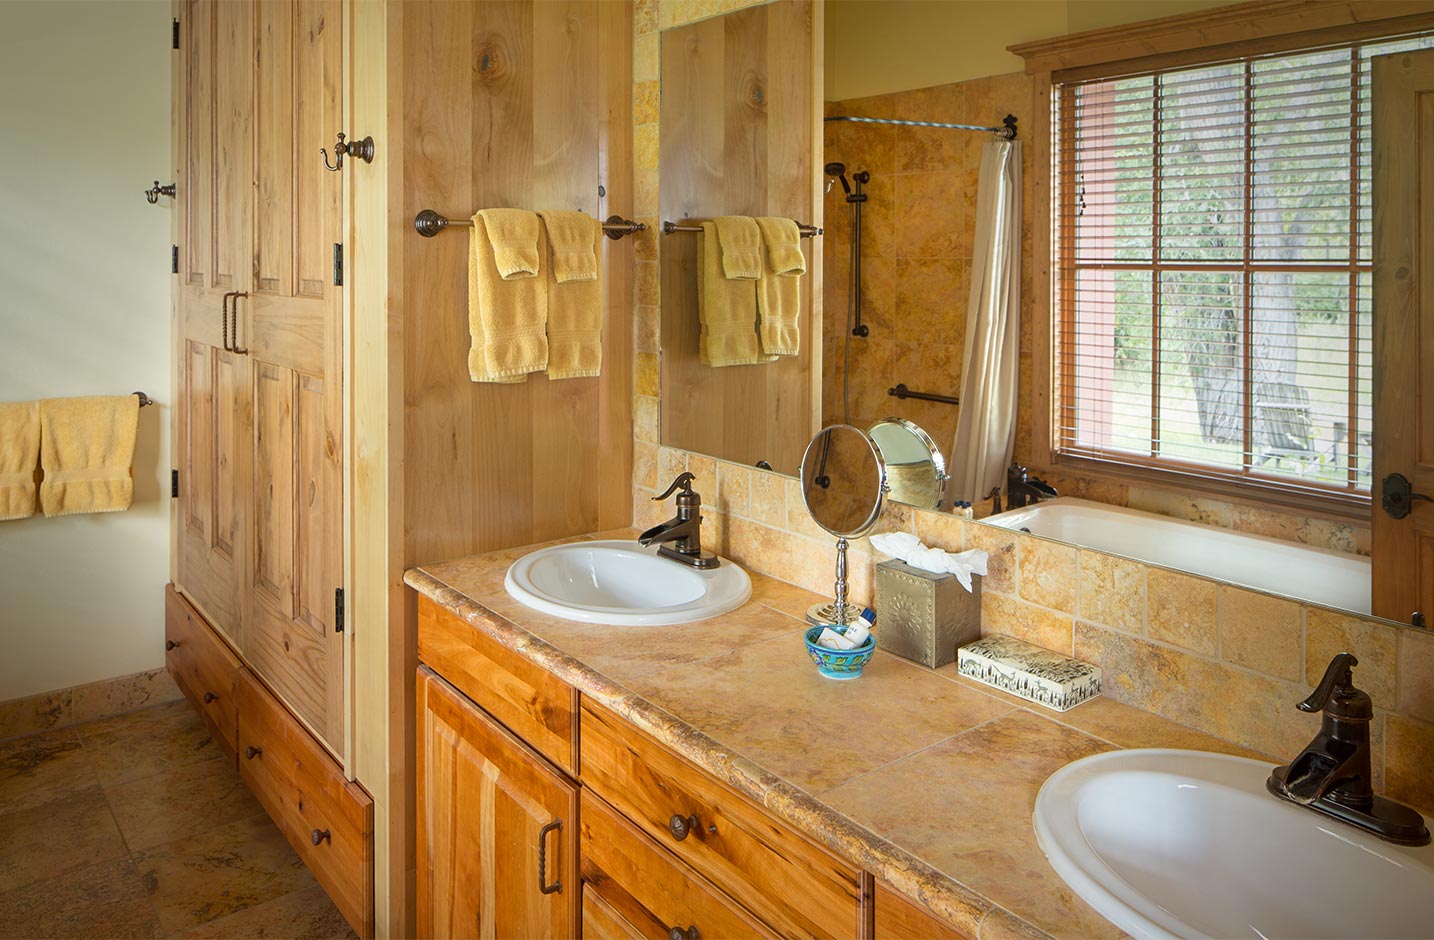 Bathroom with double vanity sinks and a walk-in shower